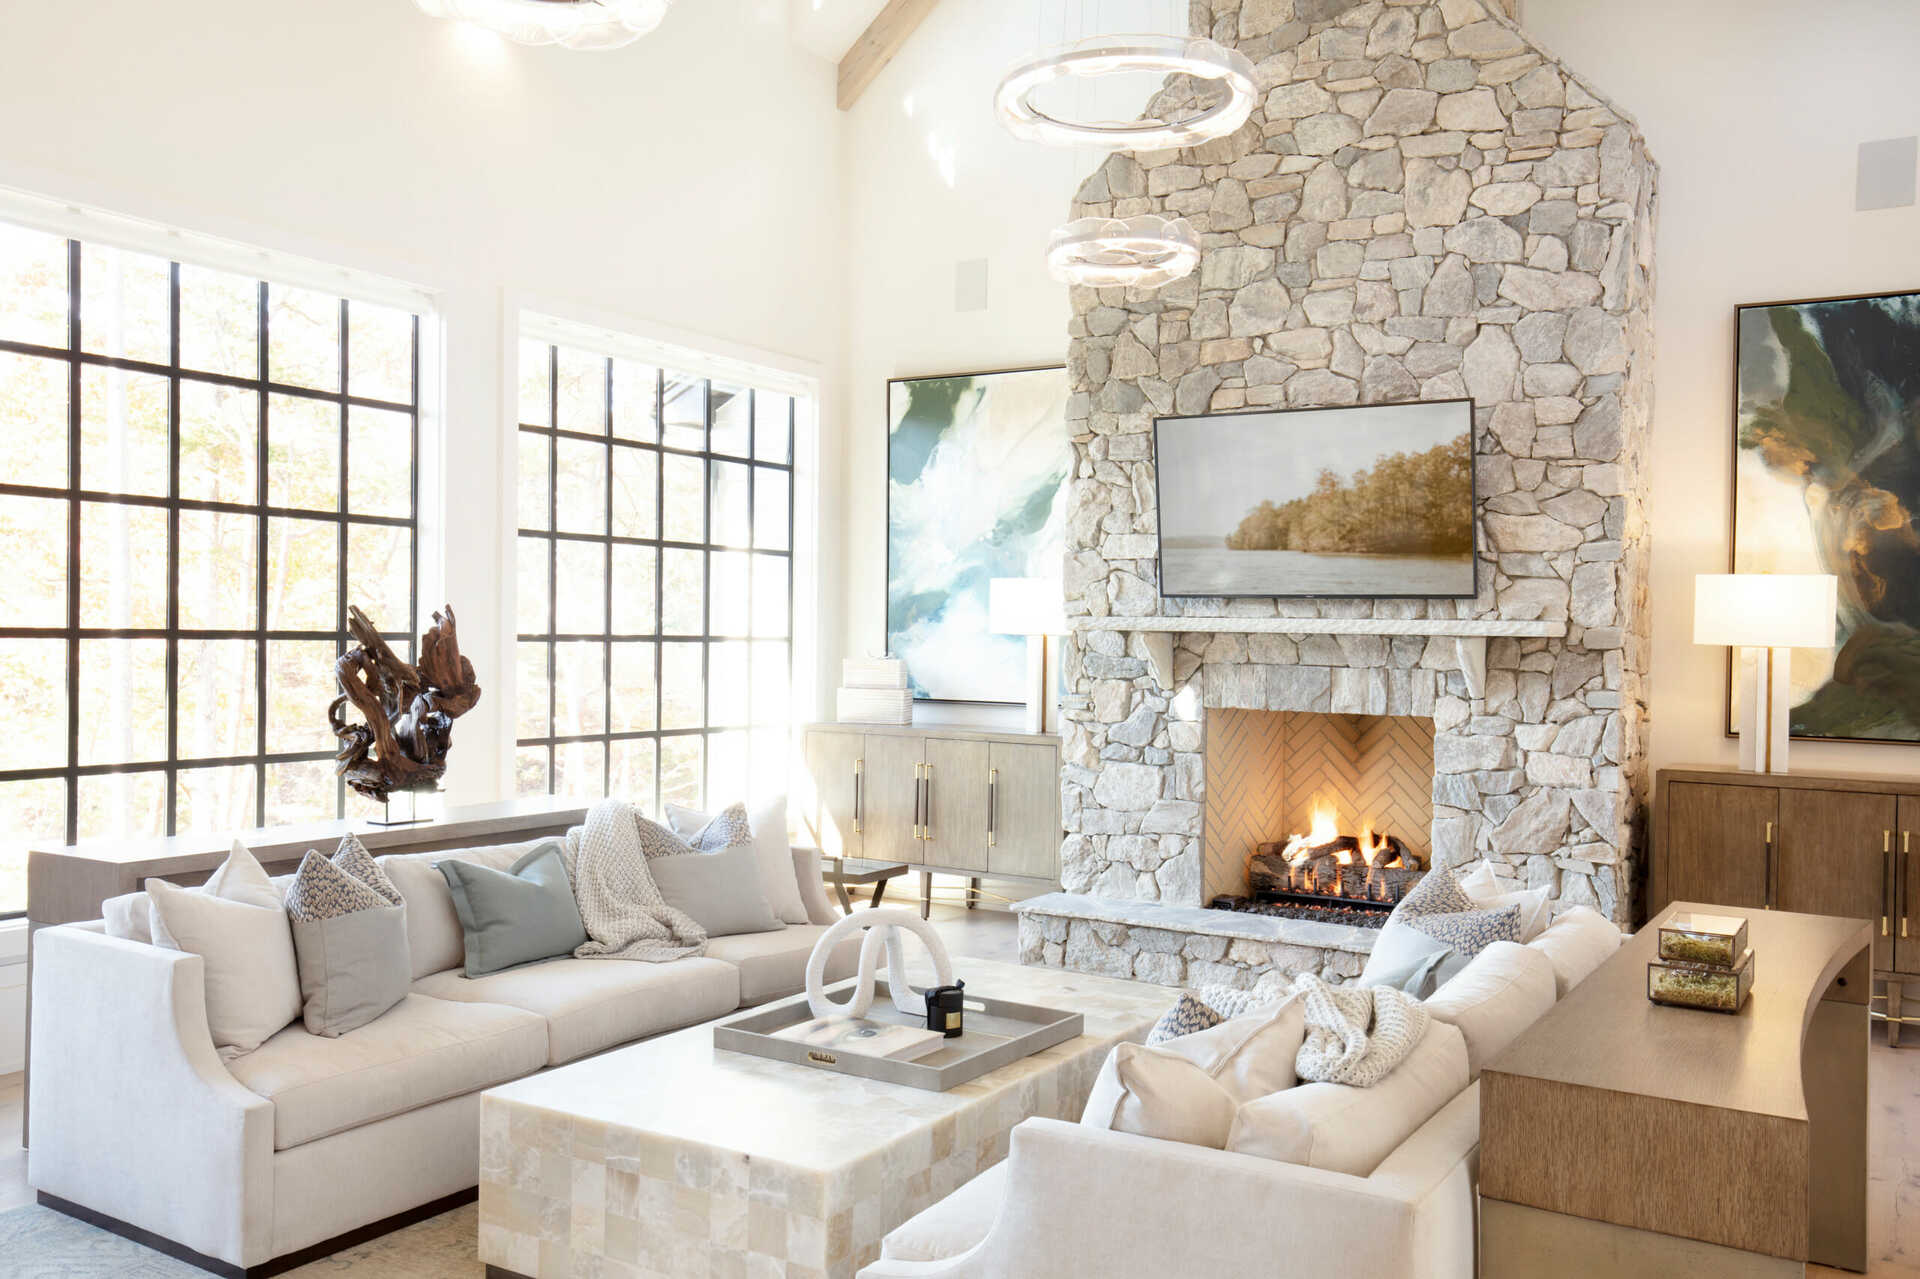 How To Arrange Furniture In Living Room With Fireplace